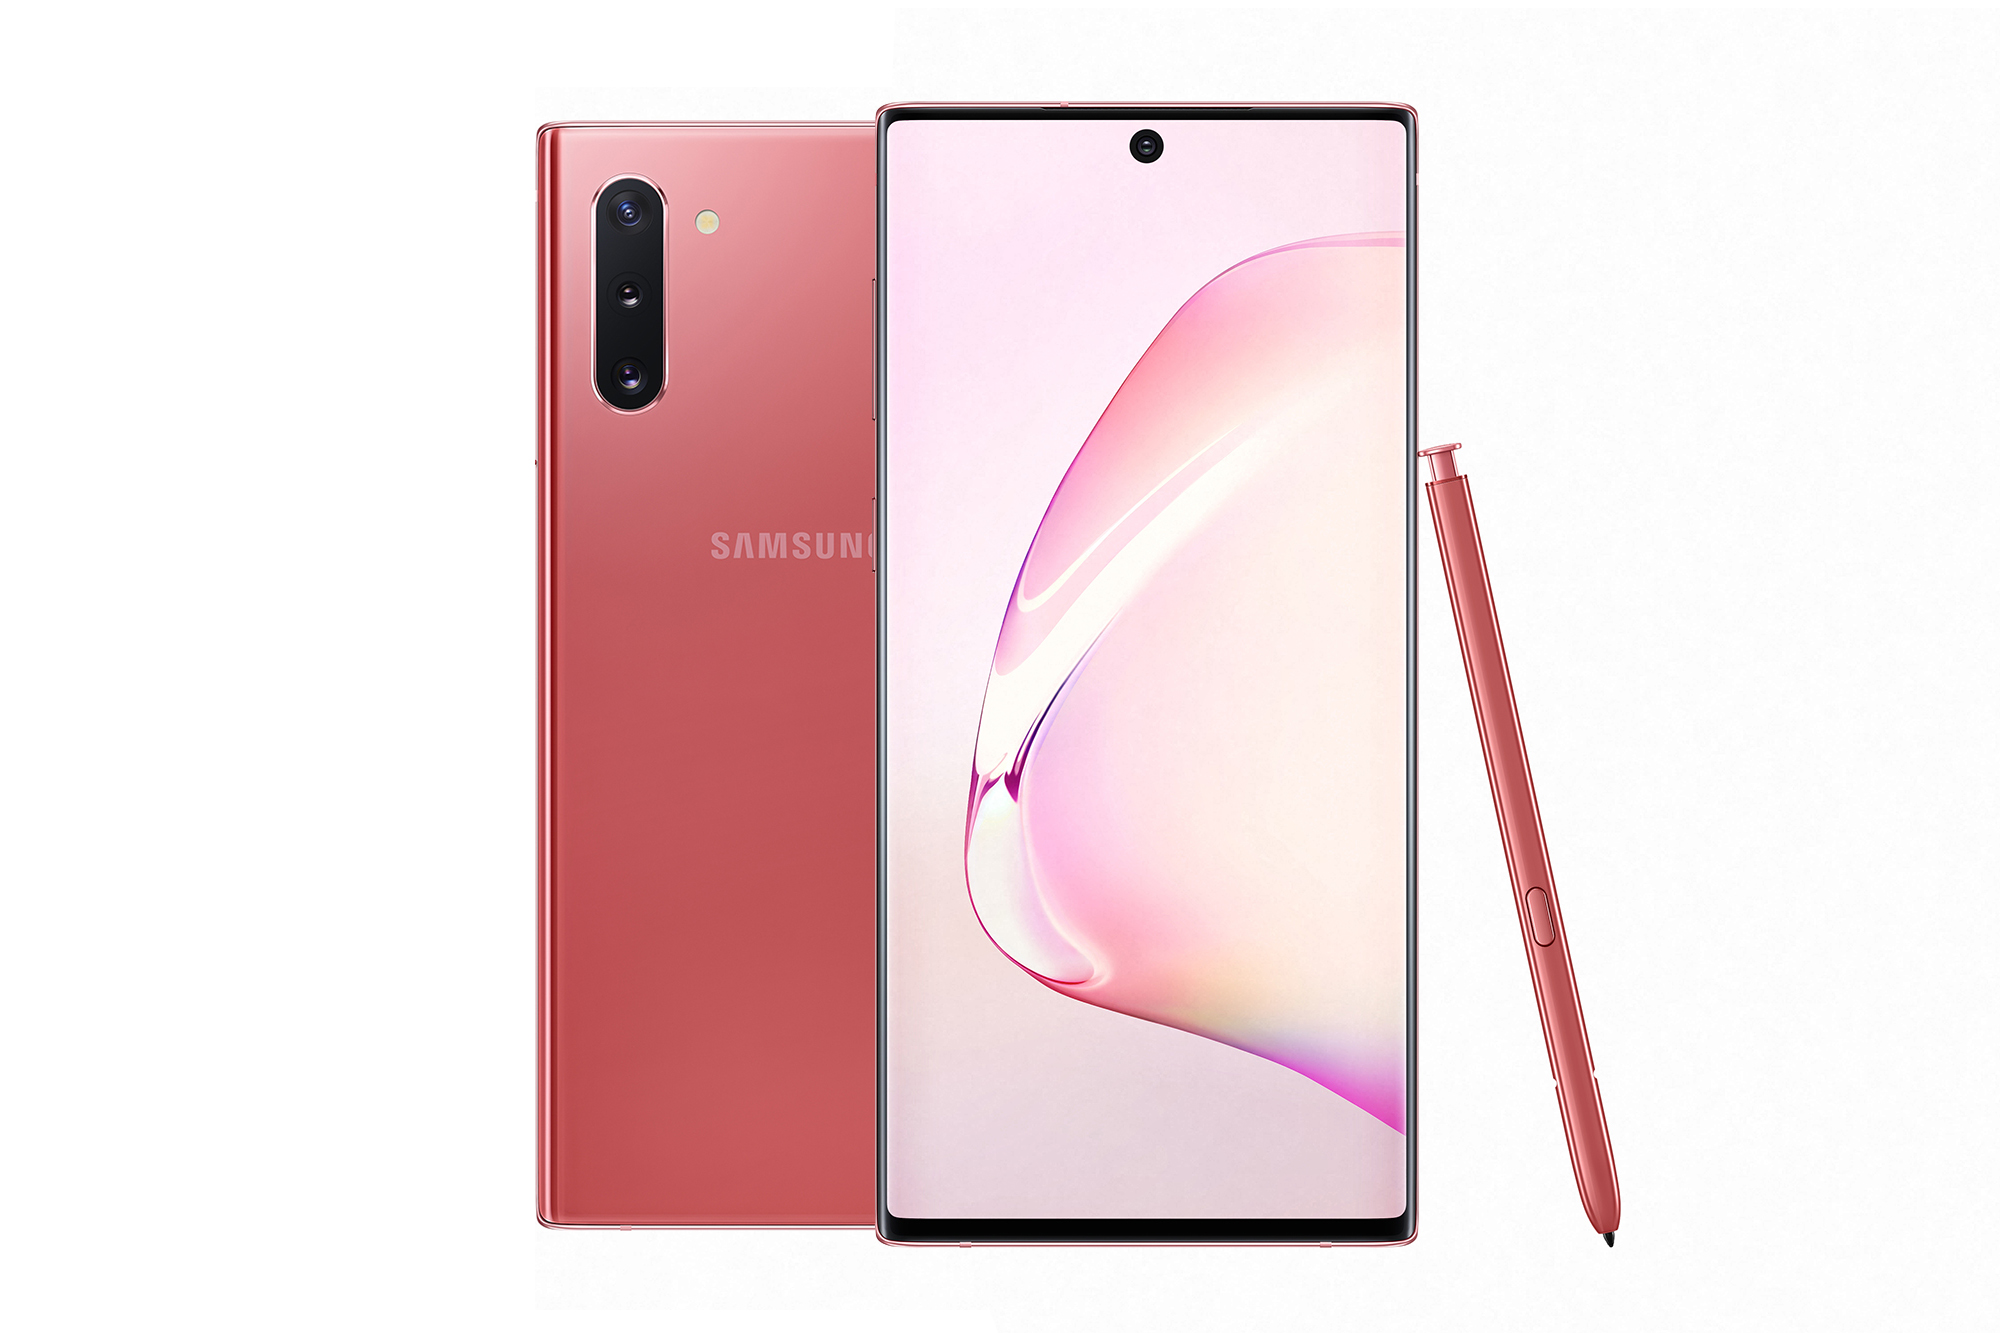 Introducing Galaxy Note10: Designed to Bring Passions to Life with  Next-Level Power - Samsung US Newsroom